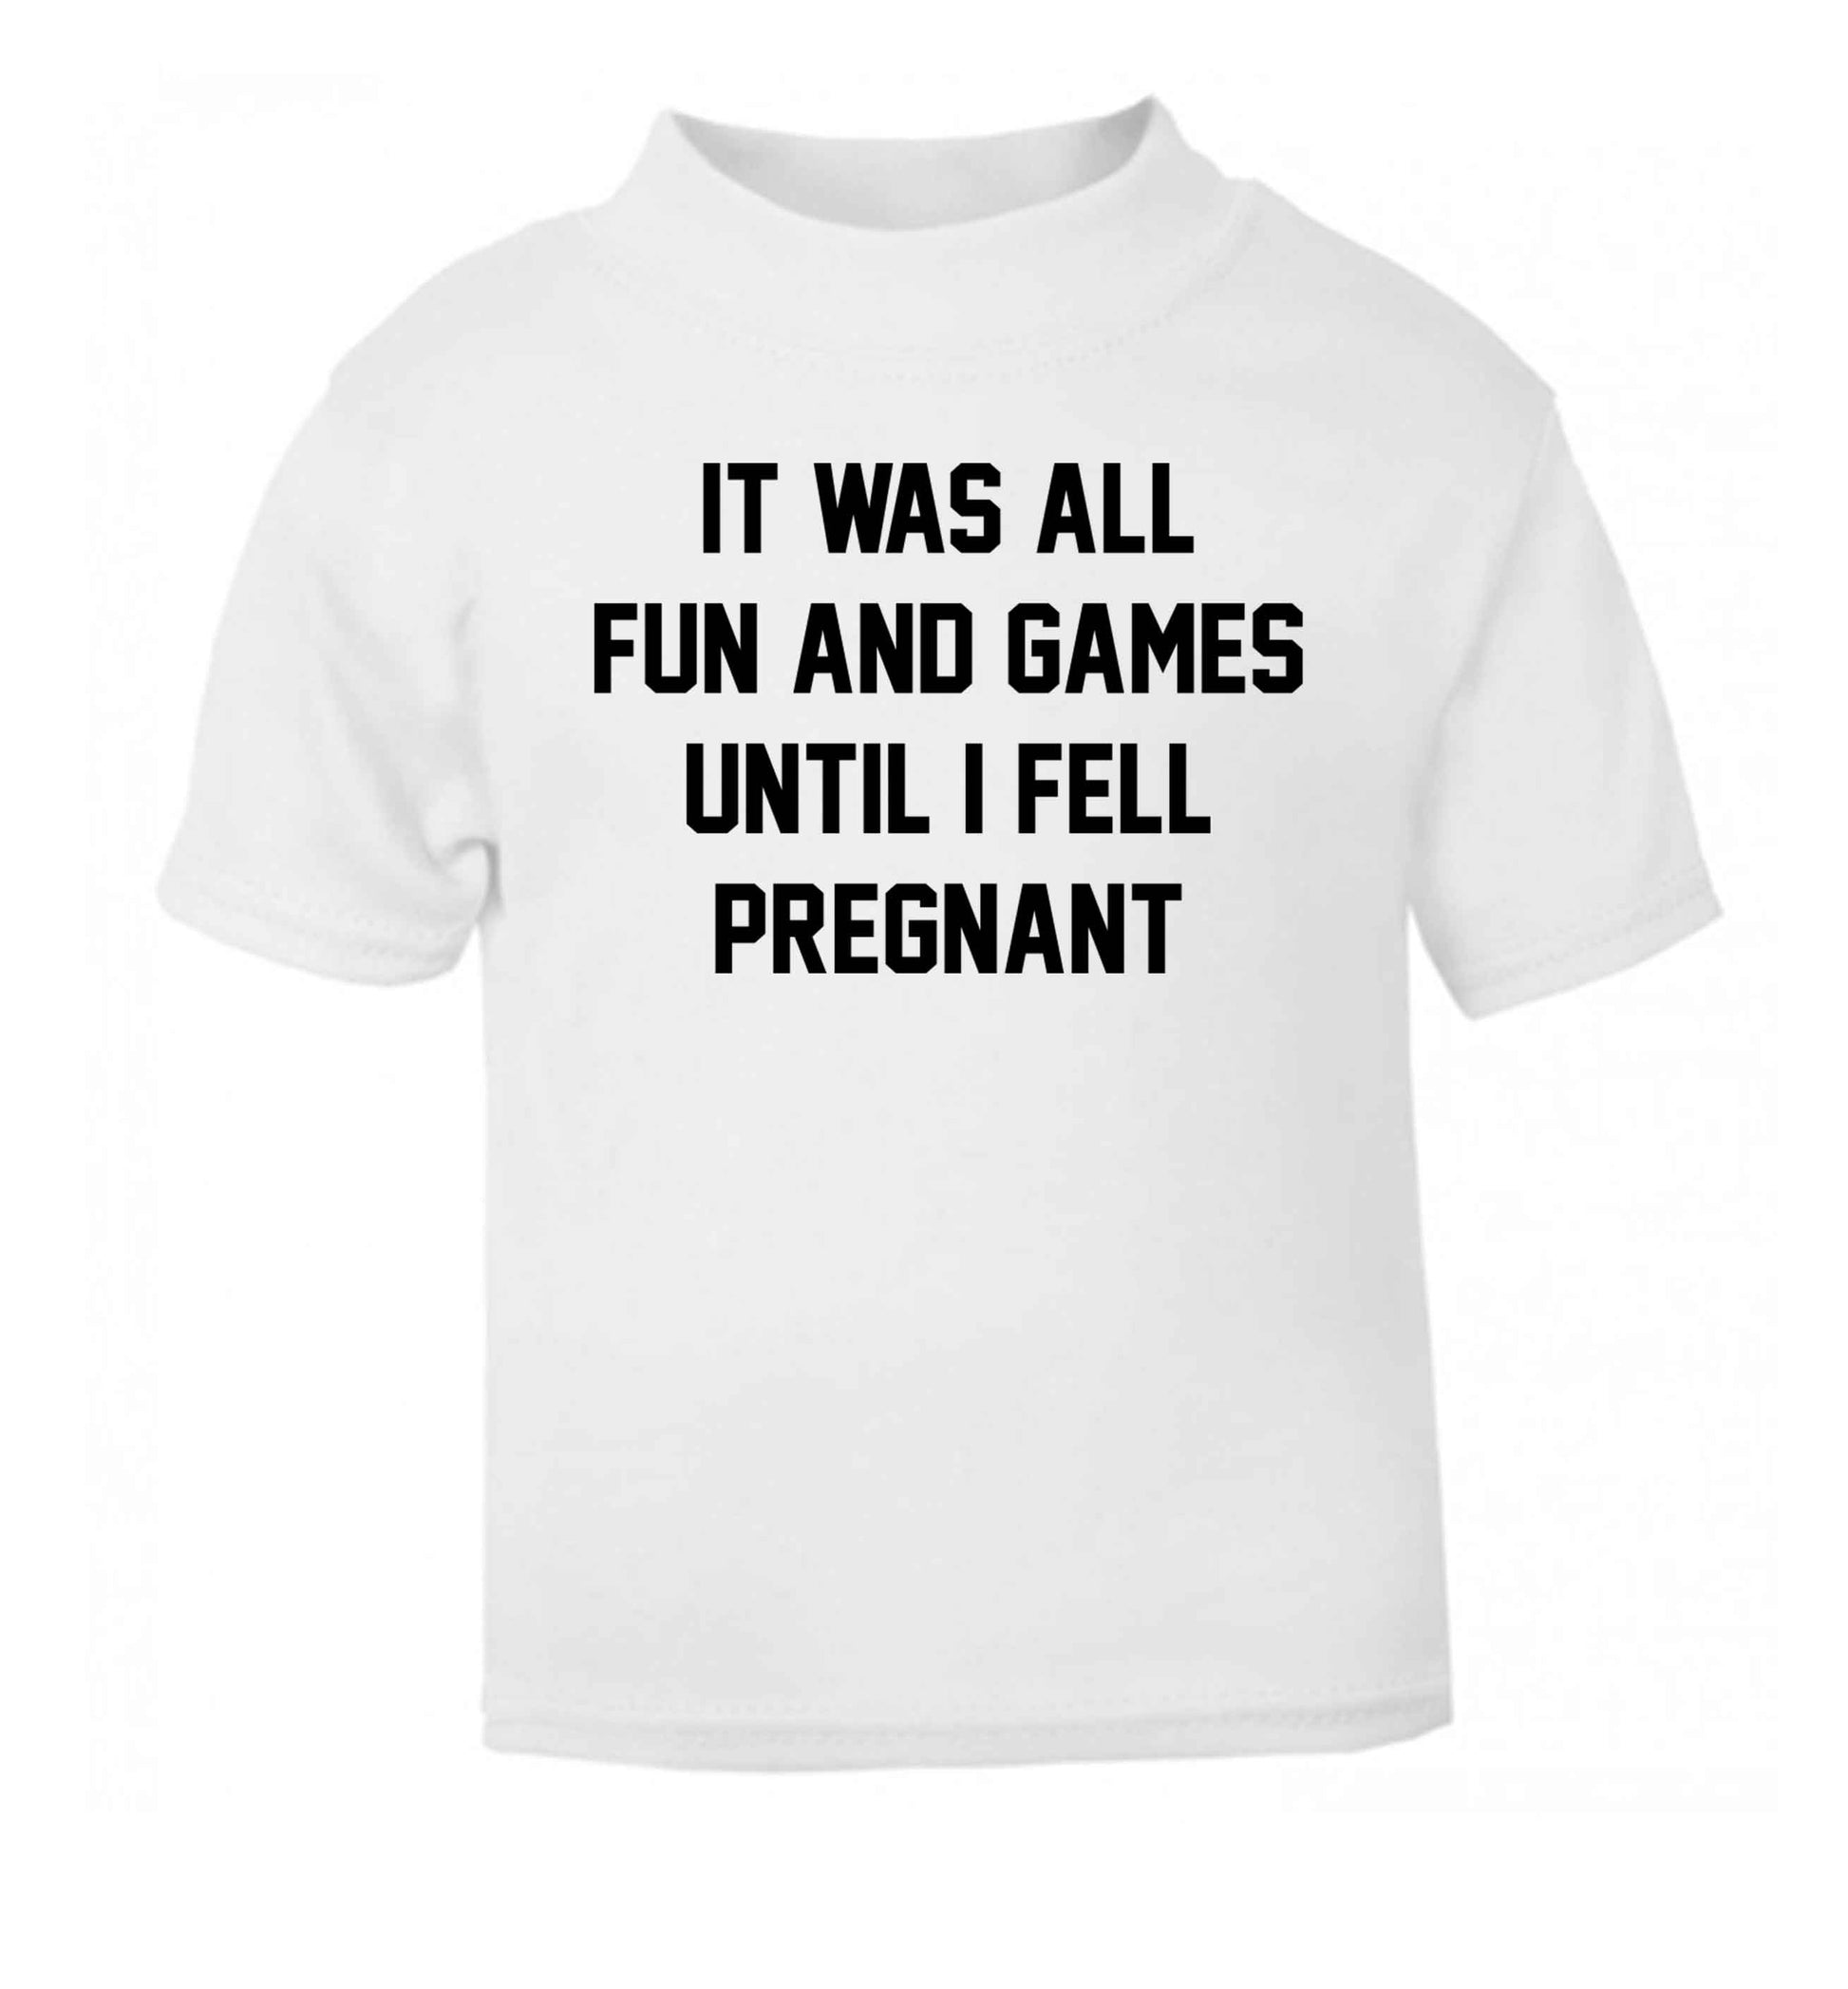 It was all fun and games until I fell pregnant kicks white Baby Toddler Tshirt 2 Years